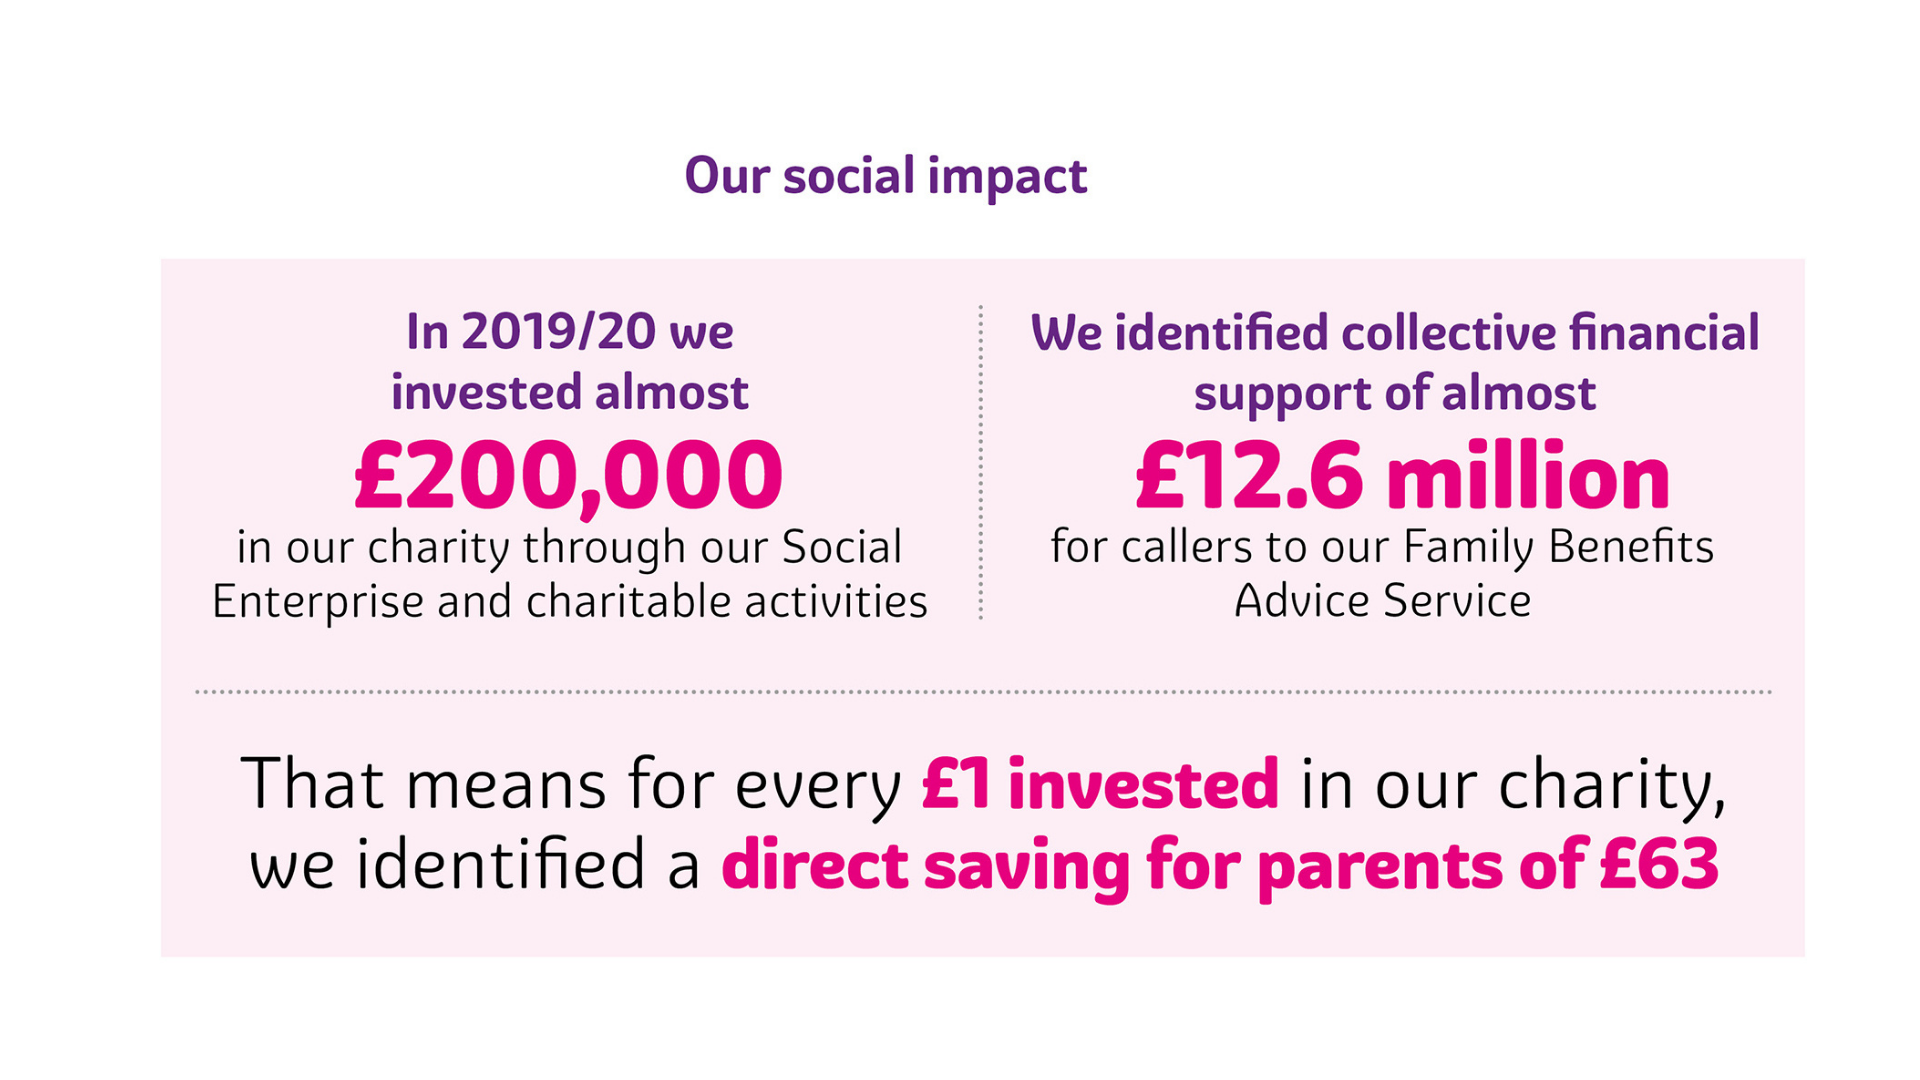 Employers For Childcare helps parents identify £12.6 million in financial savings